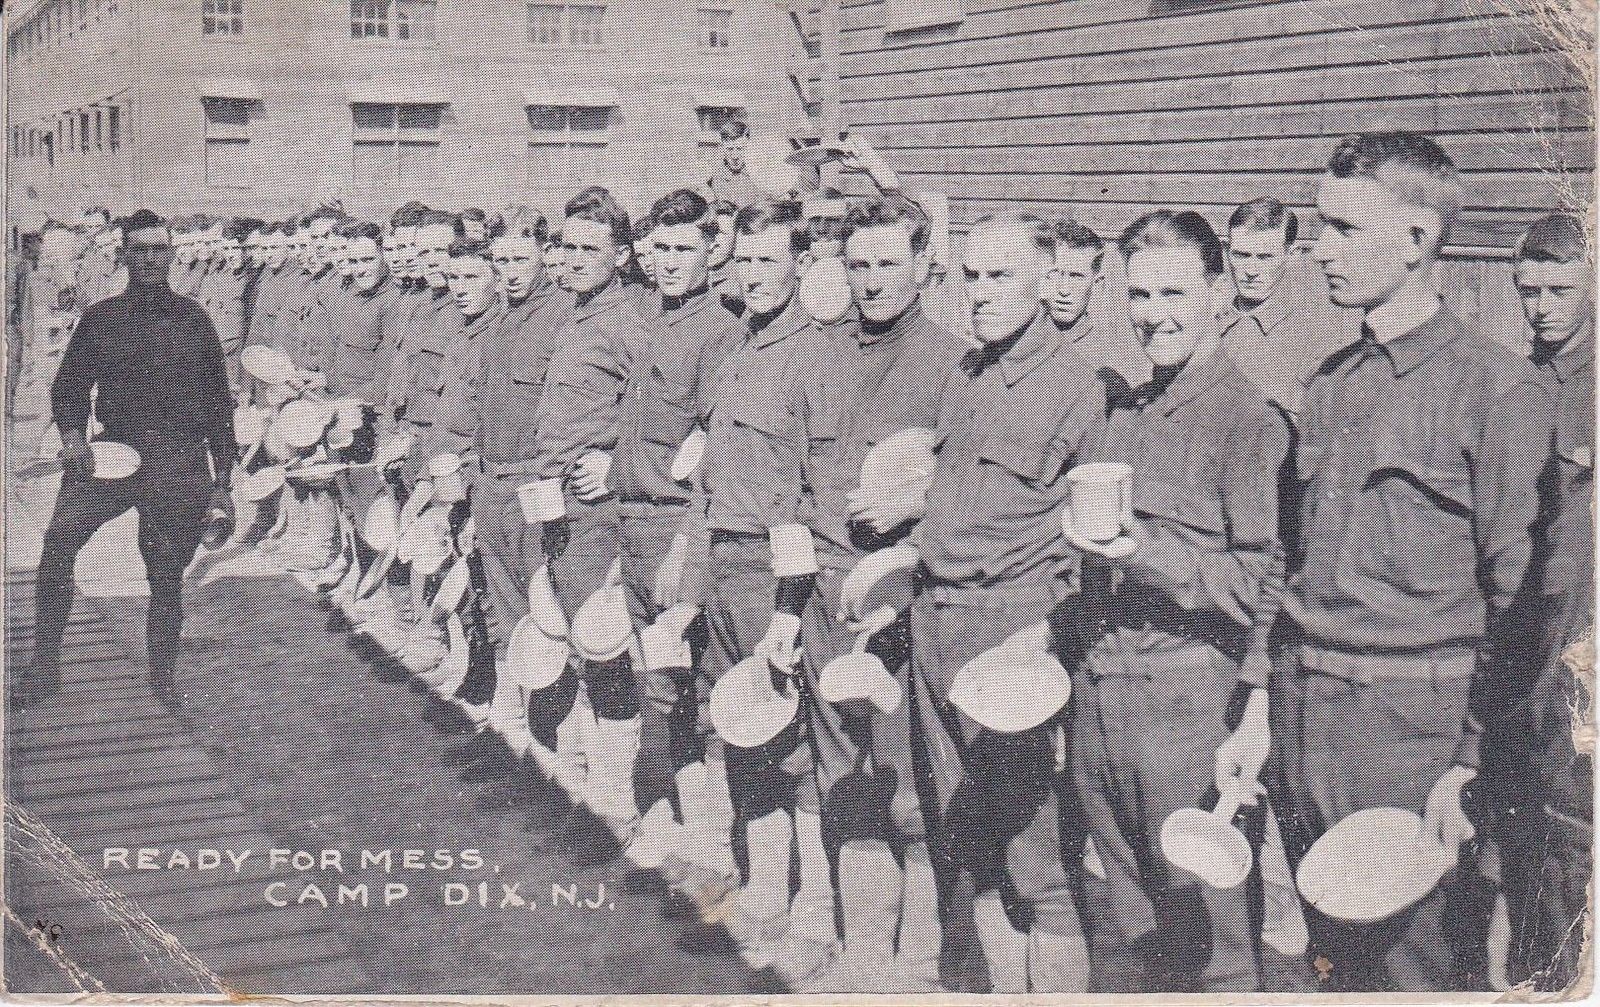 Camp Dix - All lined up at mess call time - probably 1917-18